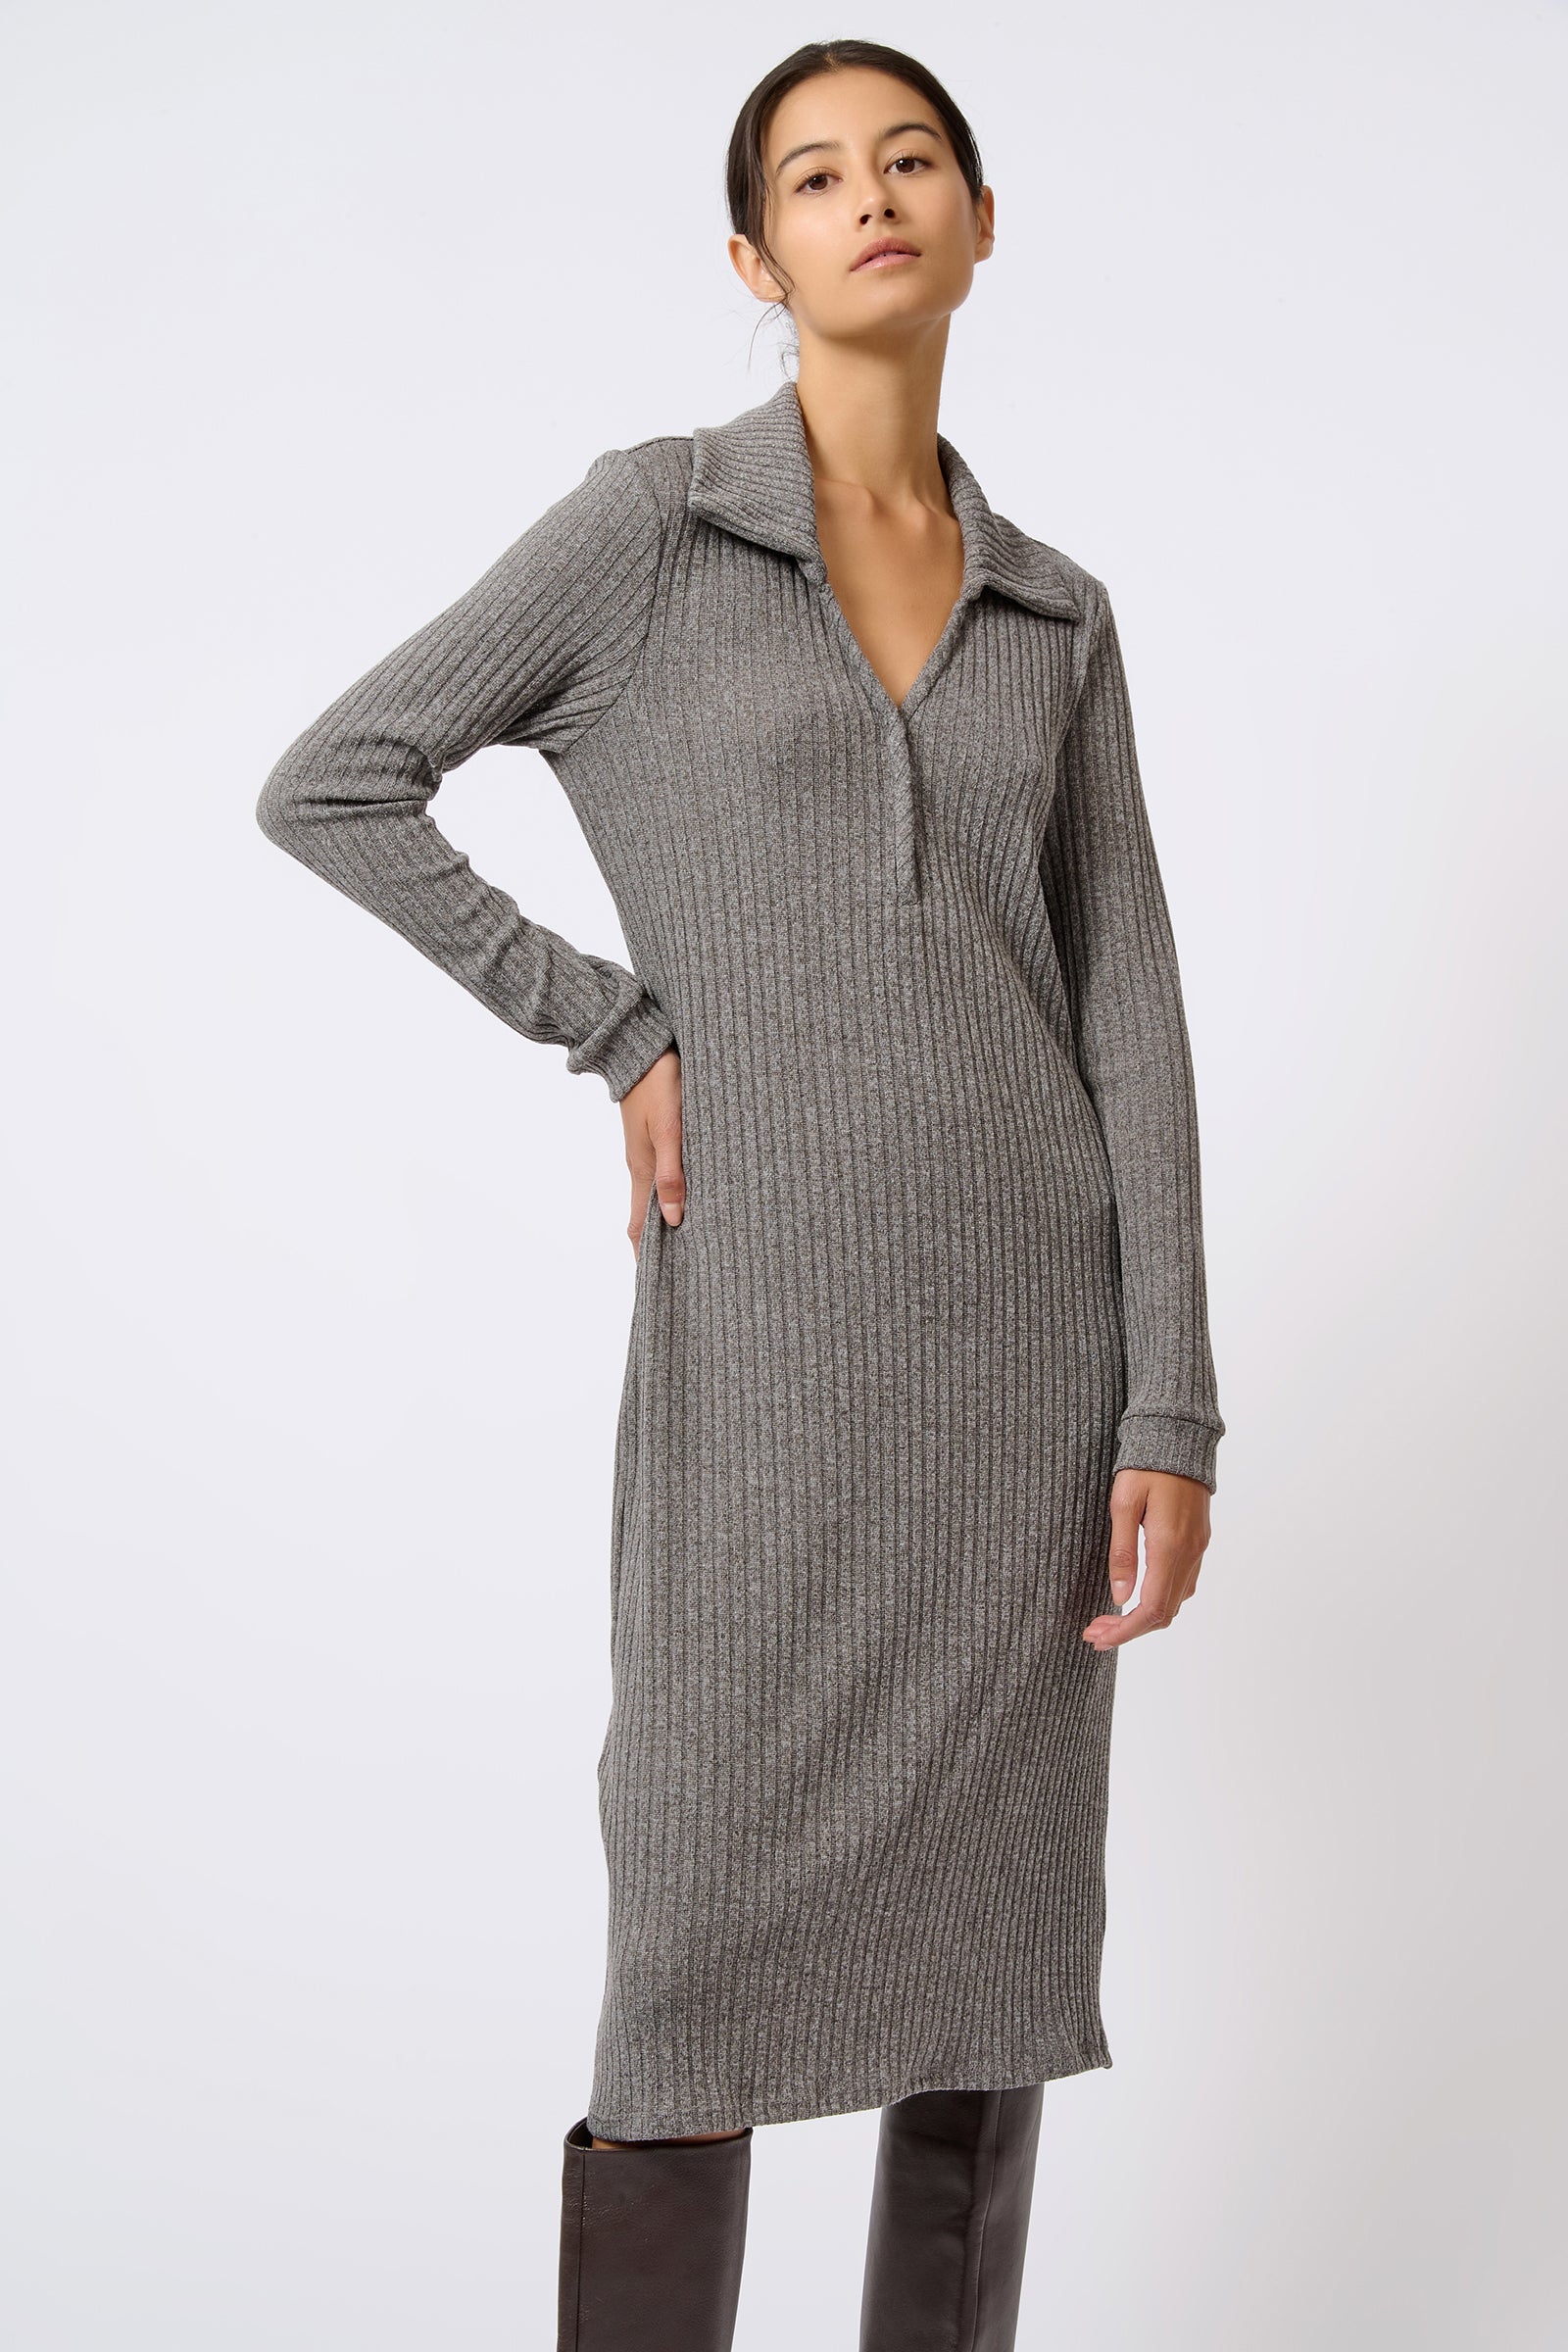 Kal Rieman Audrey Collared Rib Dress in Charcoal on Model with Hand on Hip Full Front View